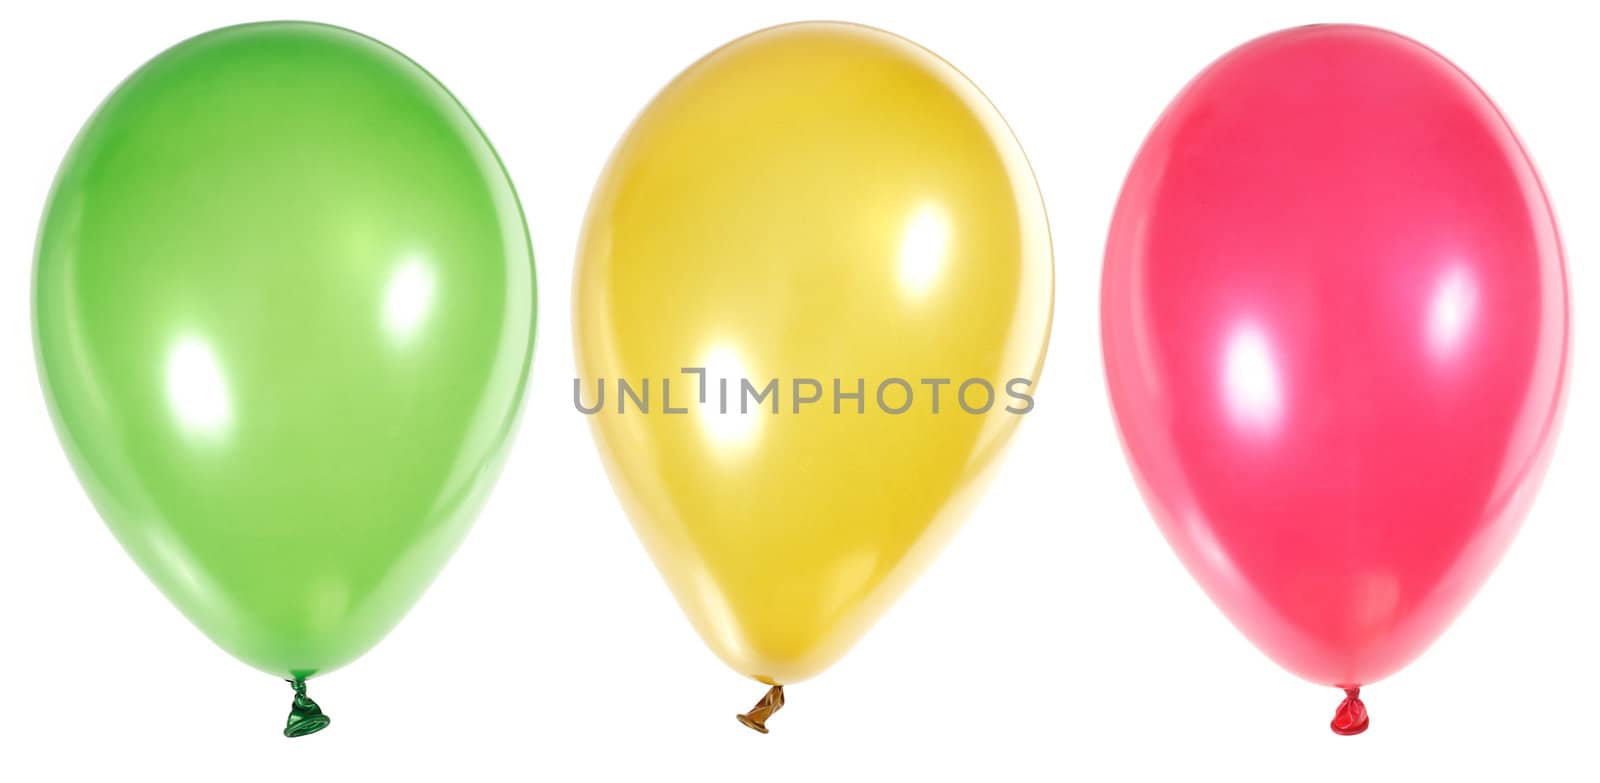 Inflatable balloons photo on the white background